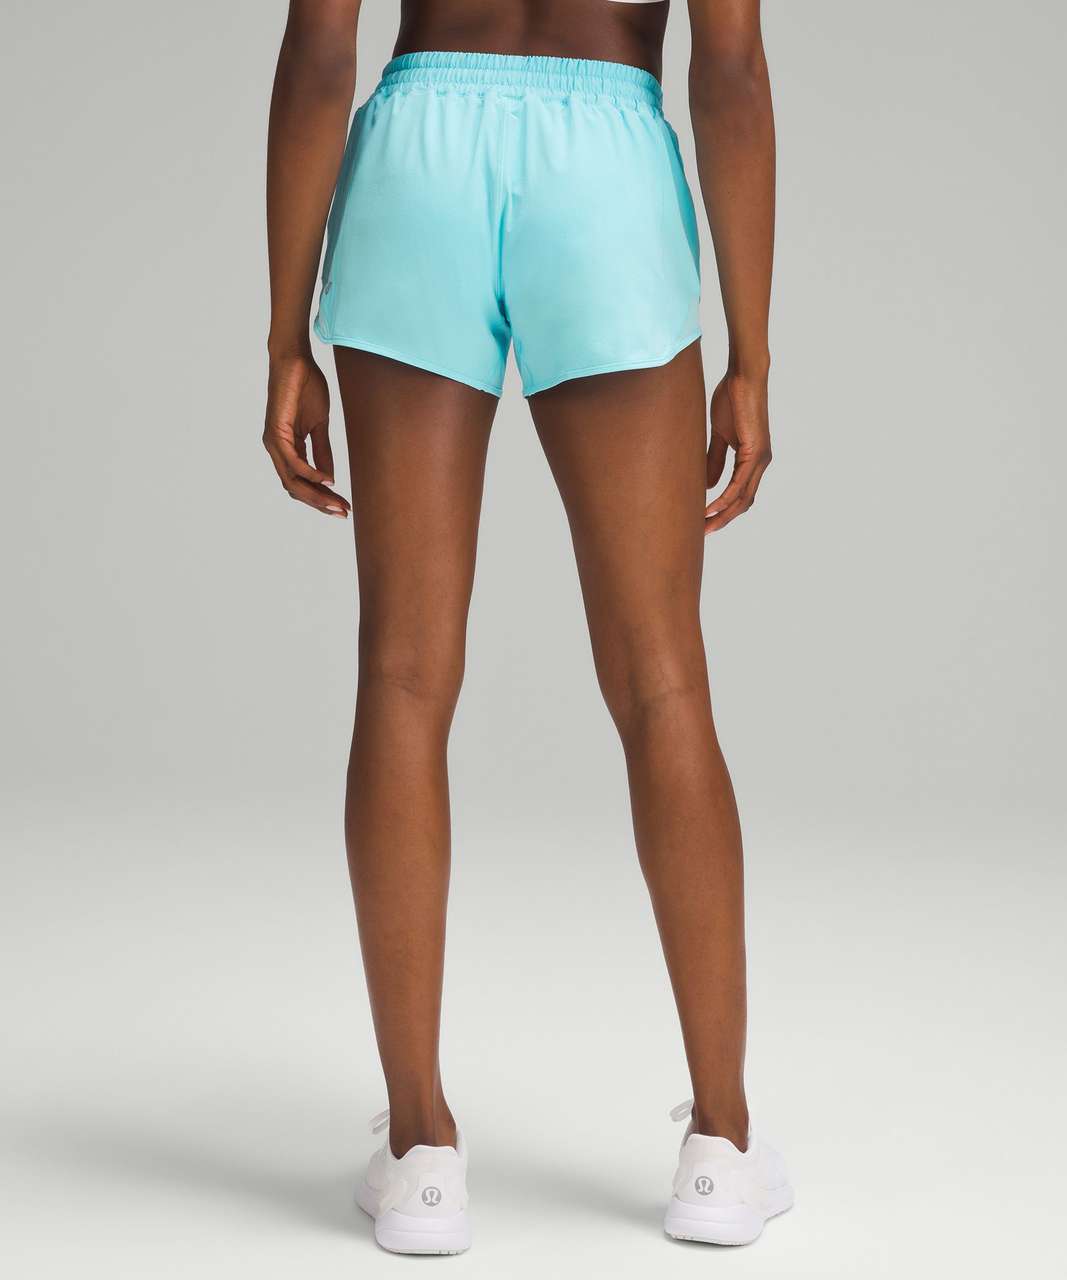 Hotty Hot Low-Rise Lined Short 4, Women's Shorts, lululemon in 2023